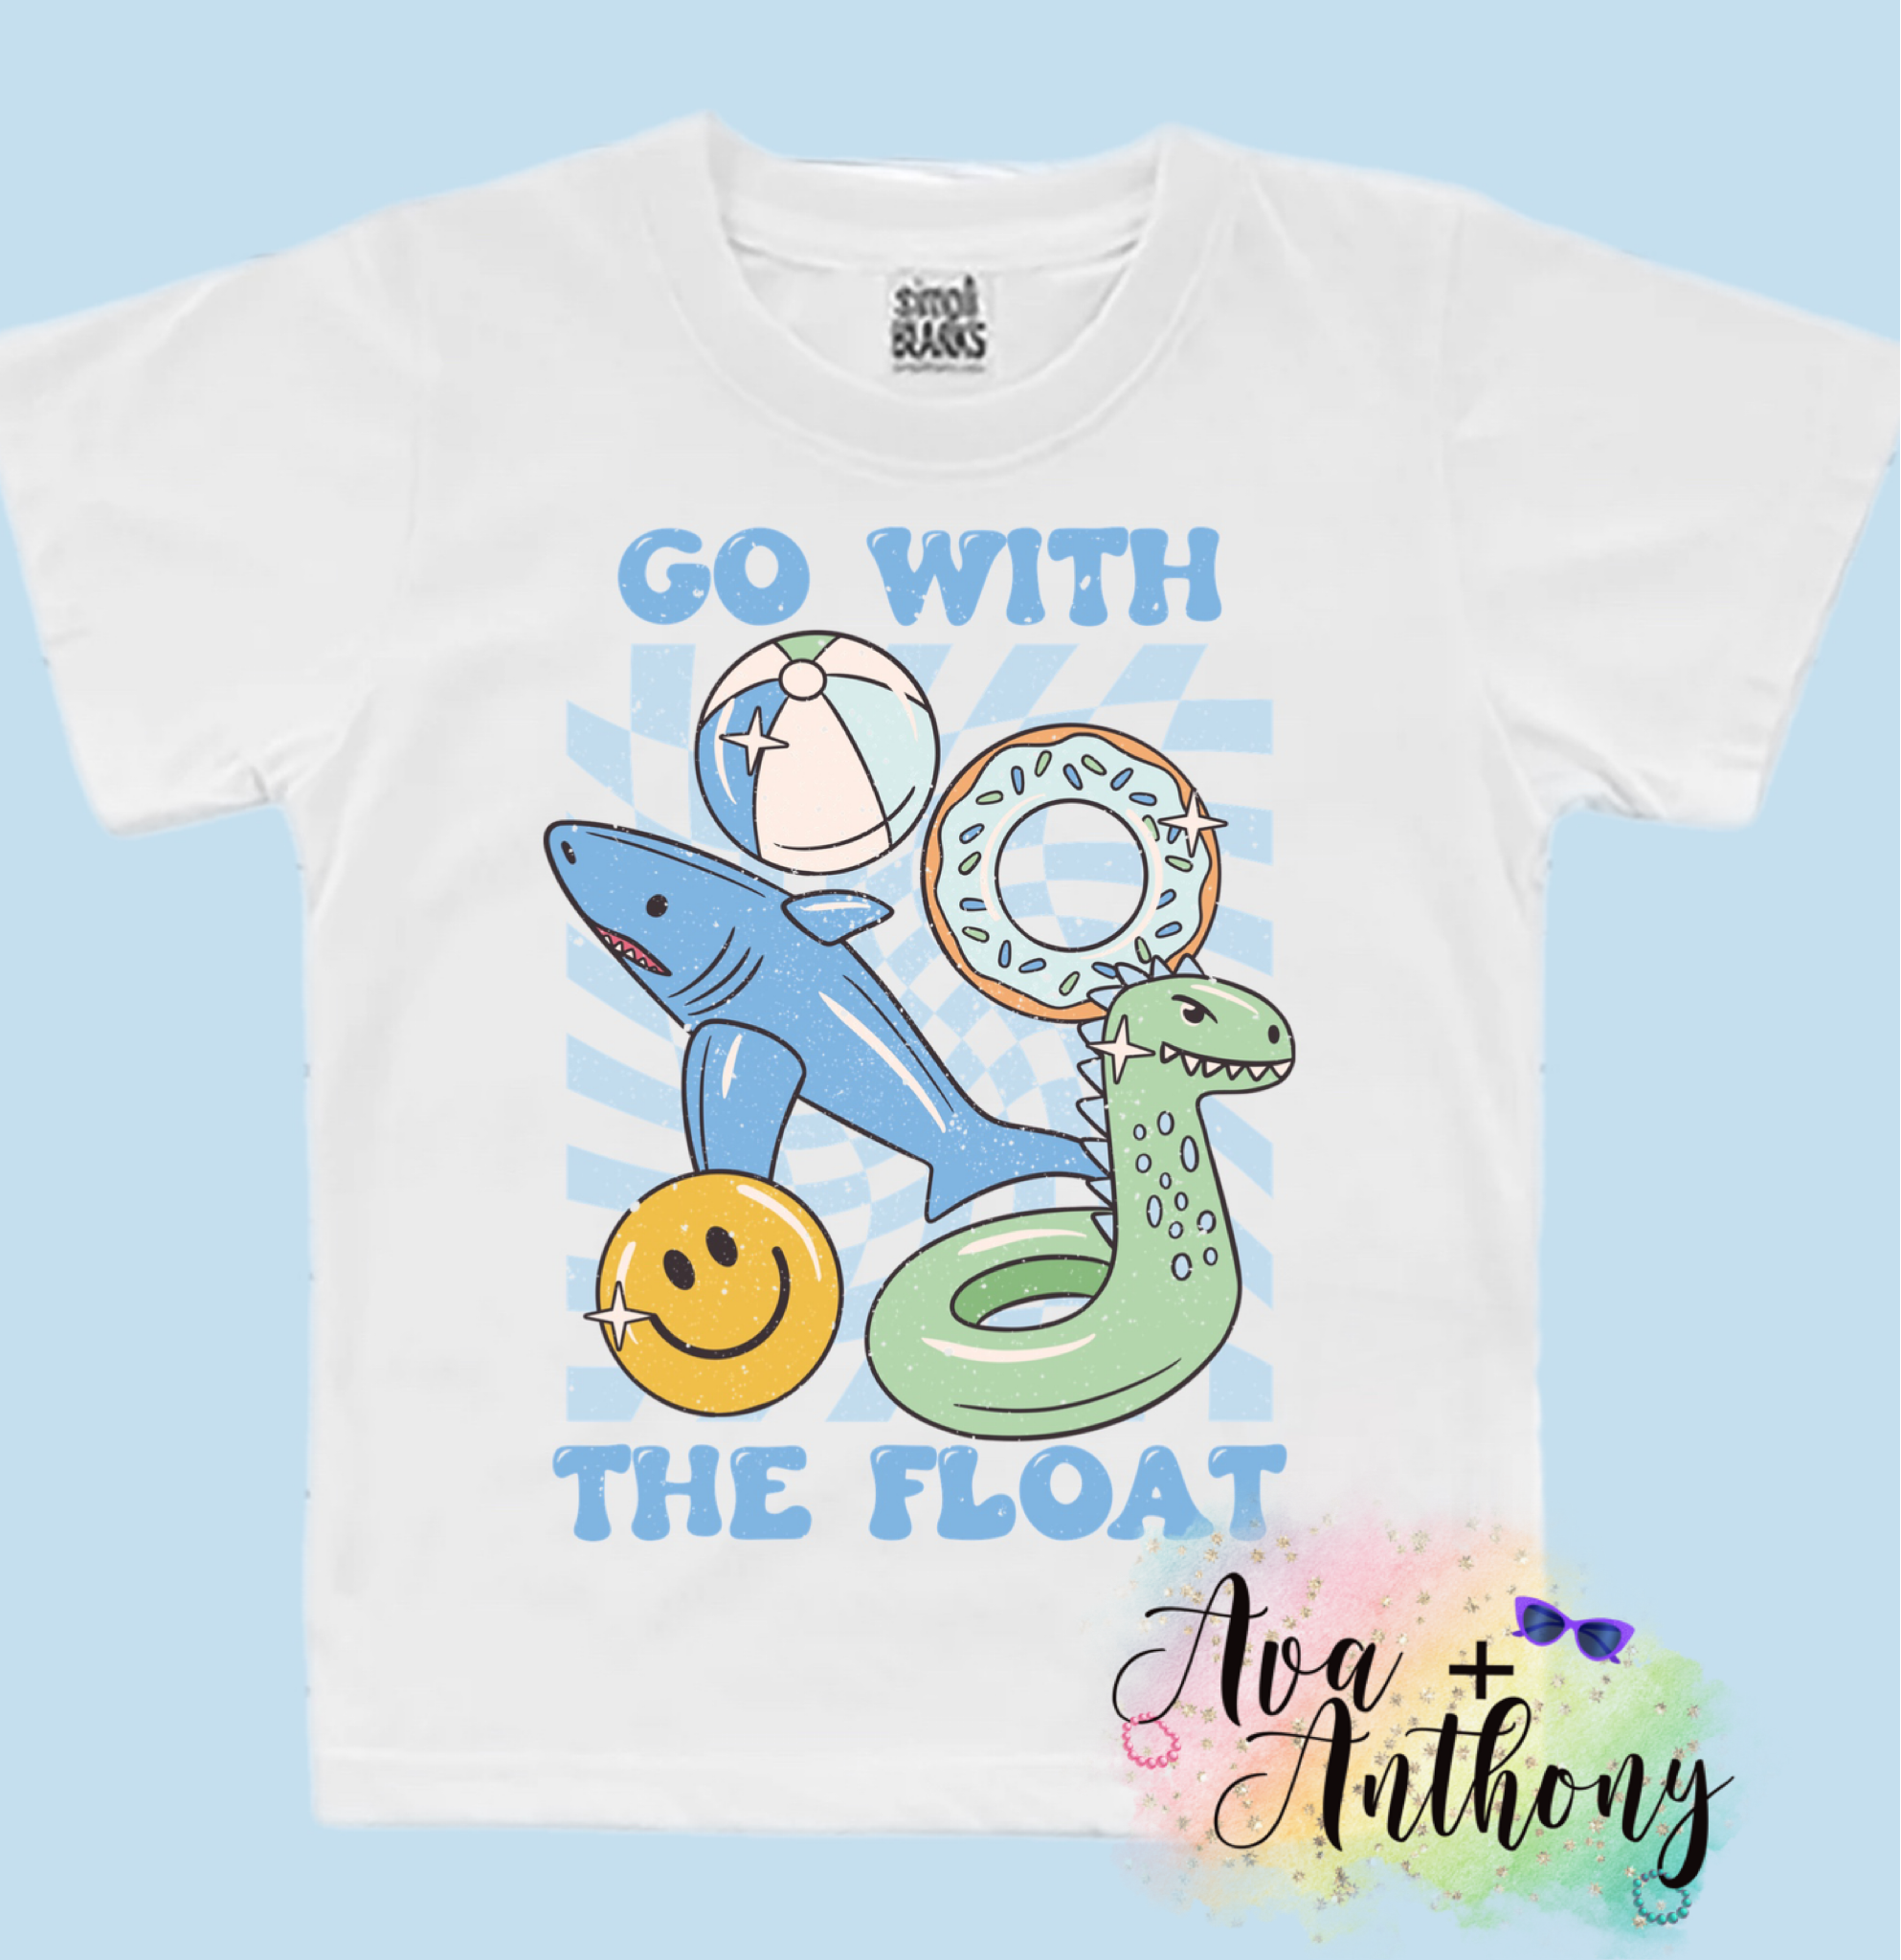 Go with the float summer t-shirt